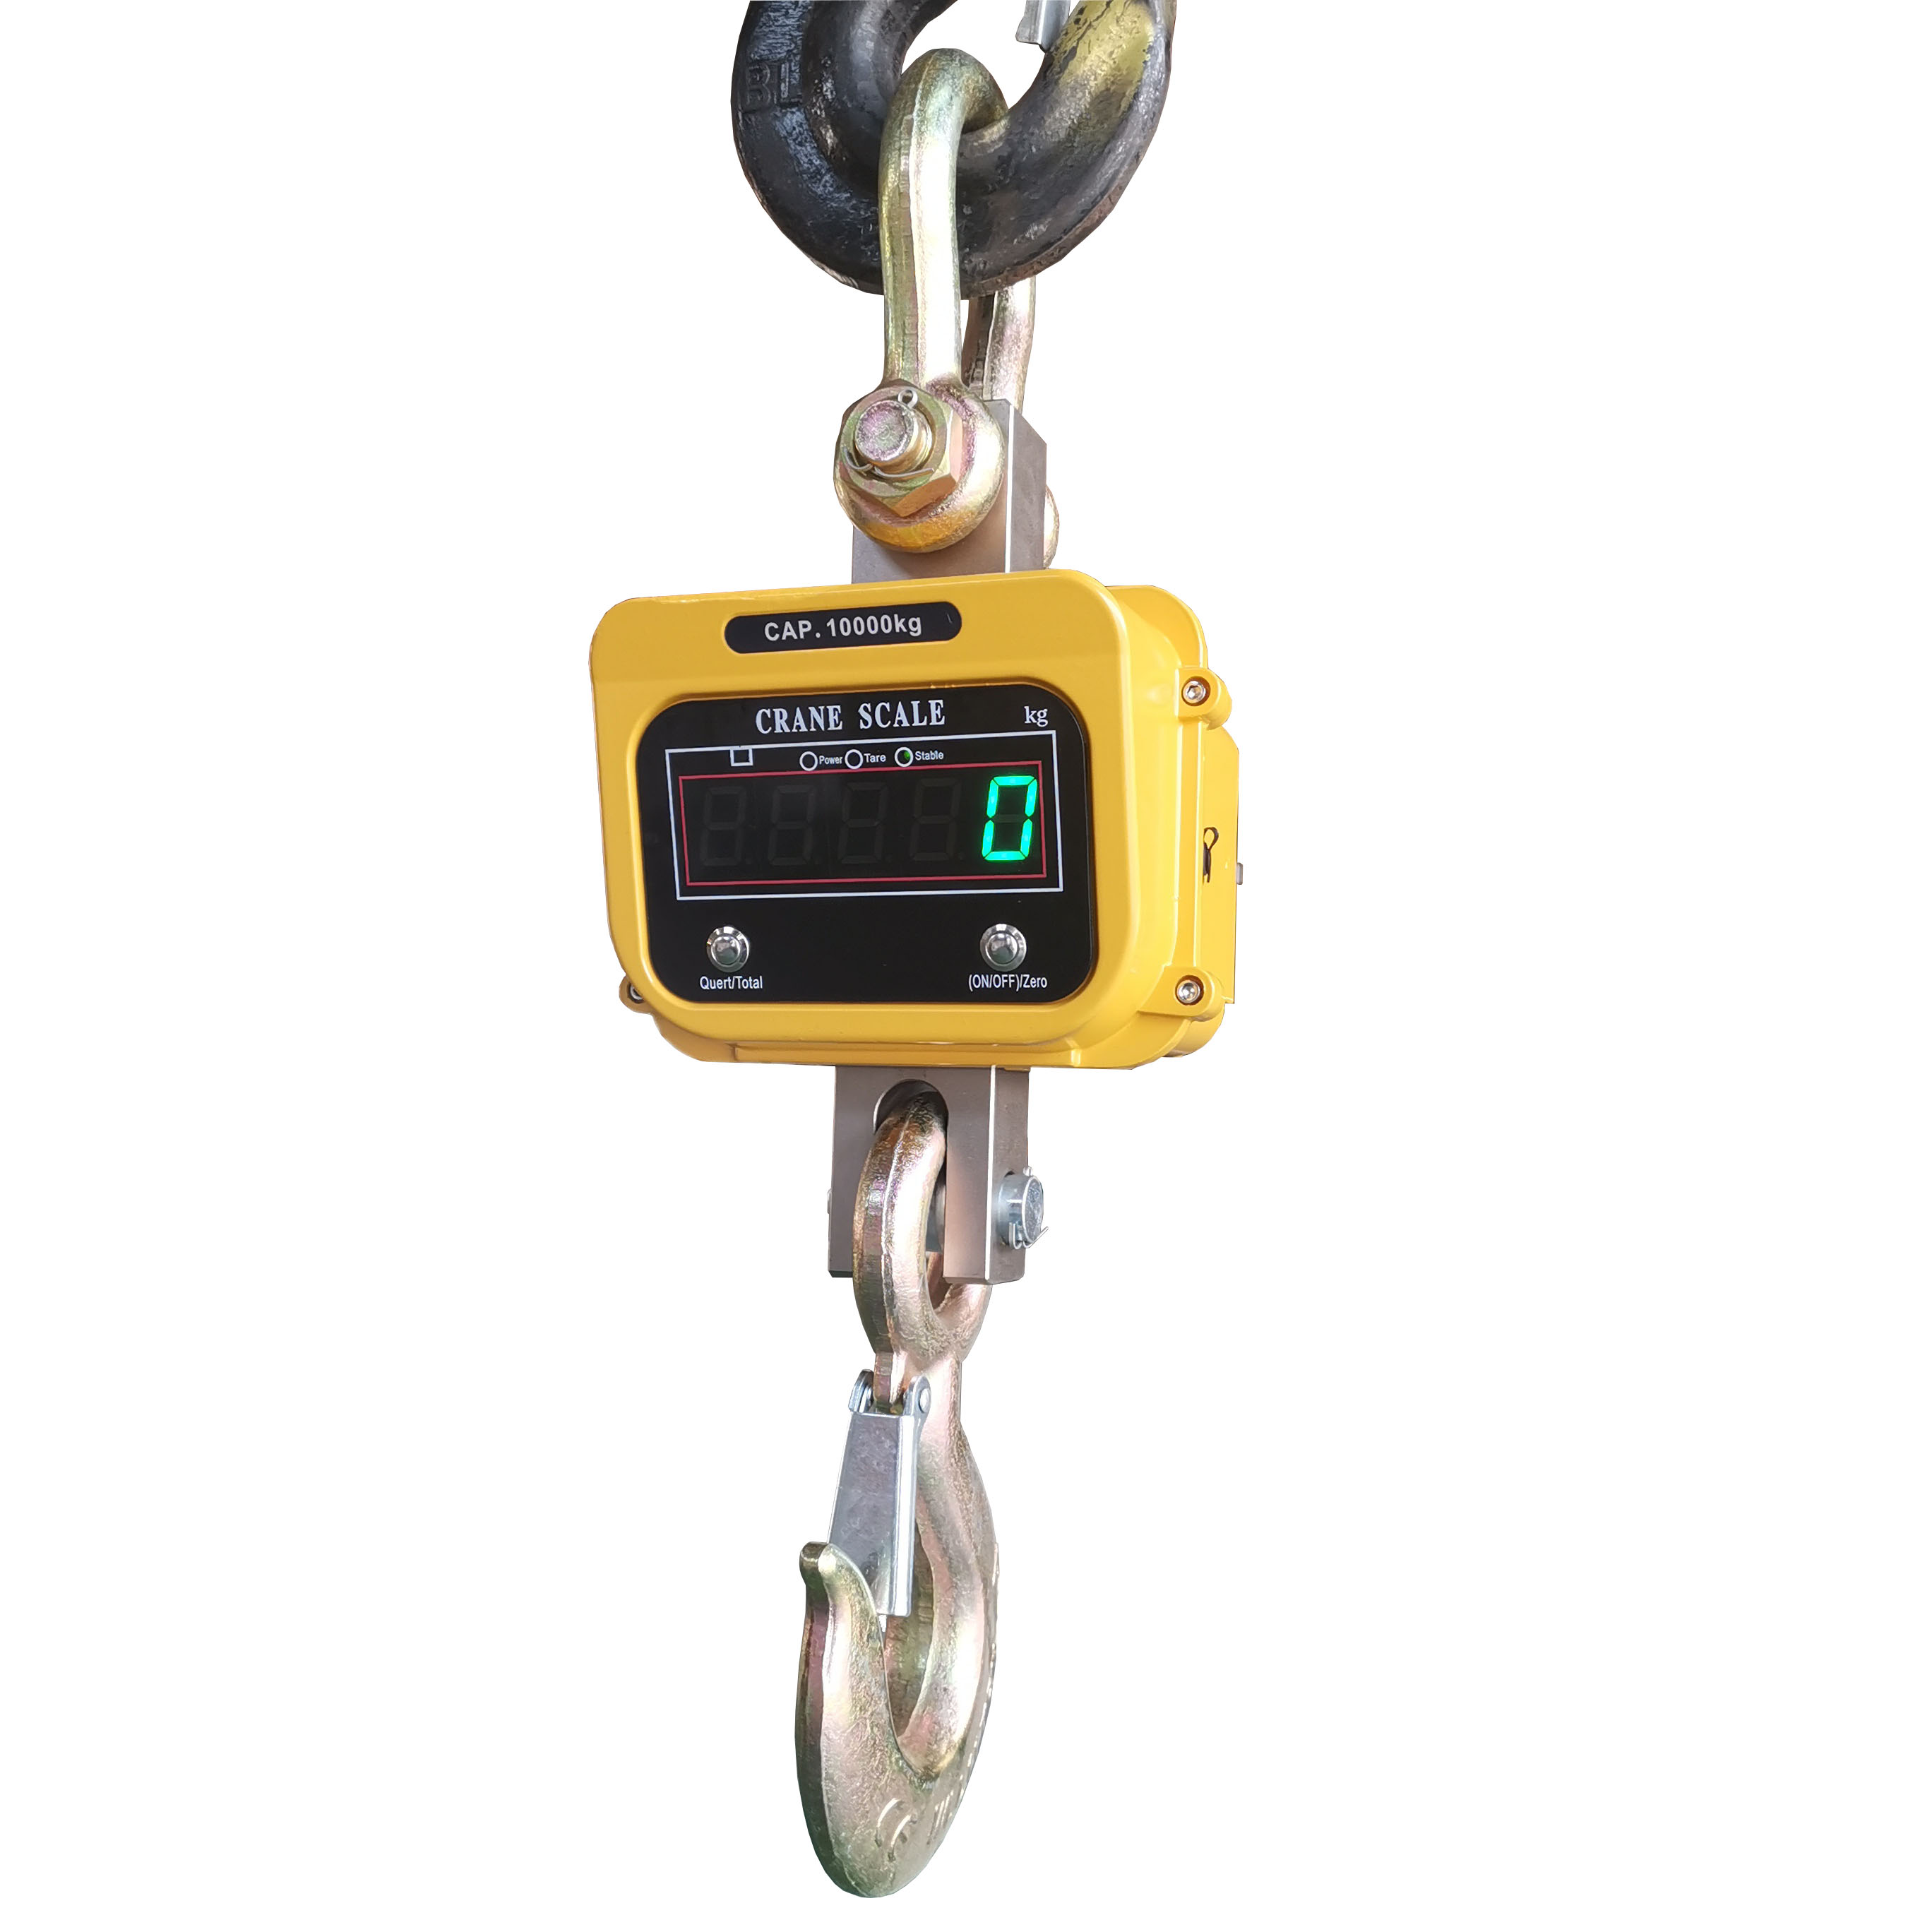 Seven Common Problems and Solutions of Electronic Crane Scales